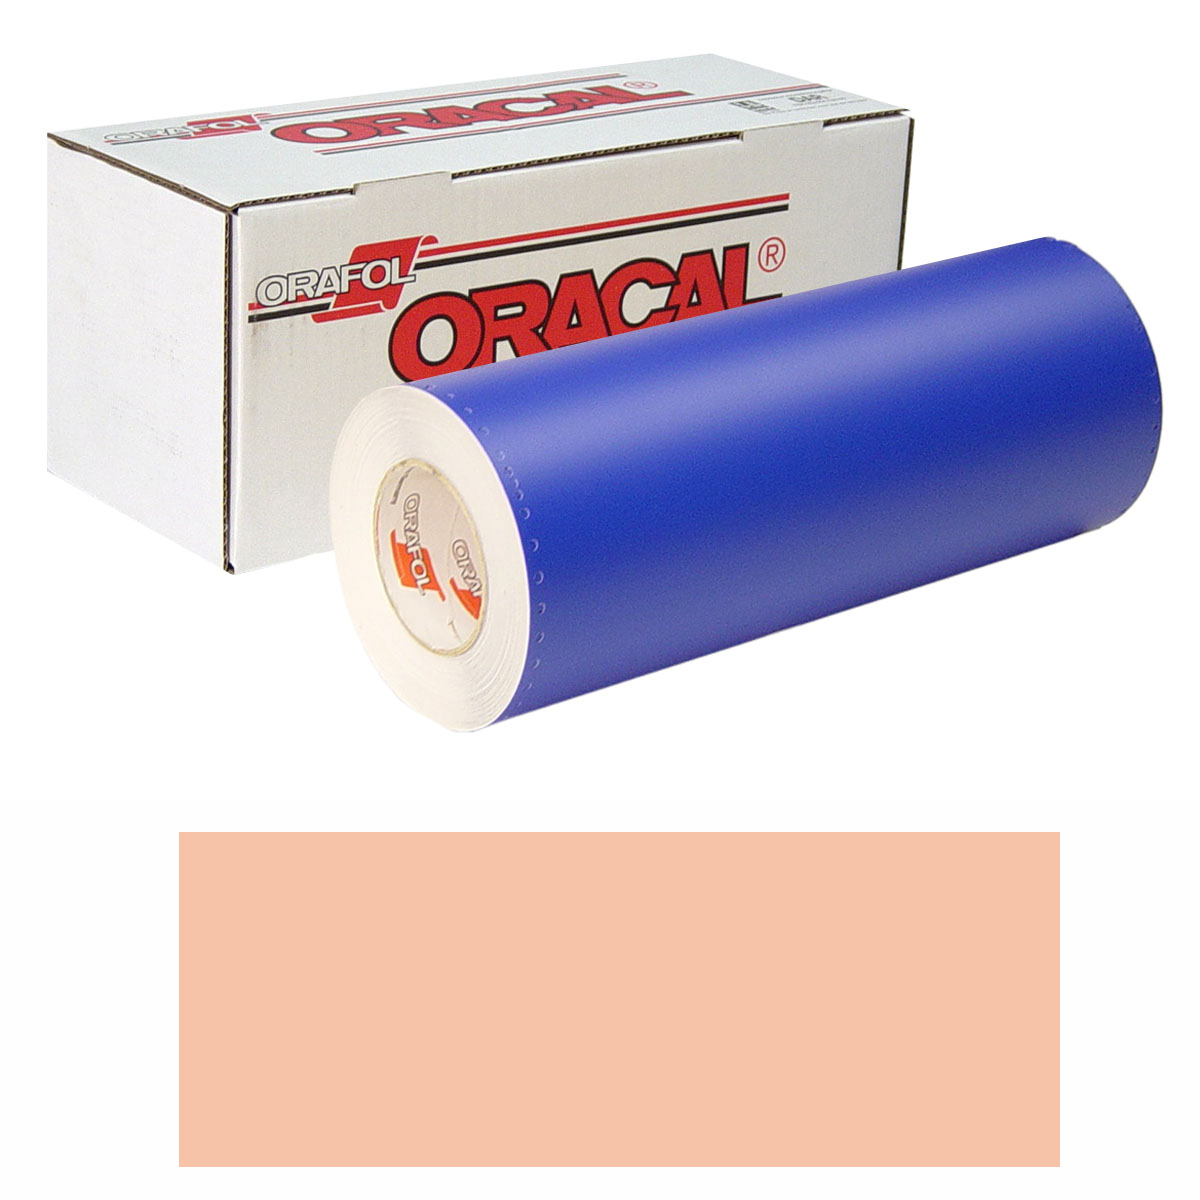 ORACAL 8300 30in X 10yd 089 Salmon Pink